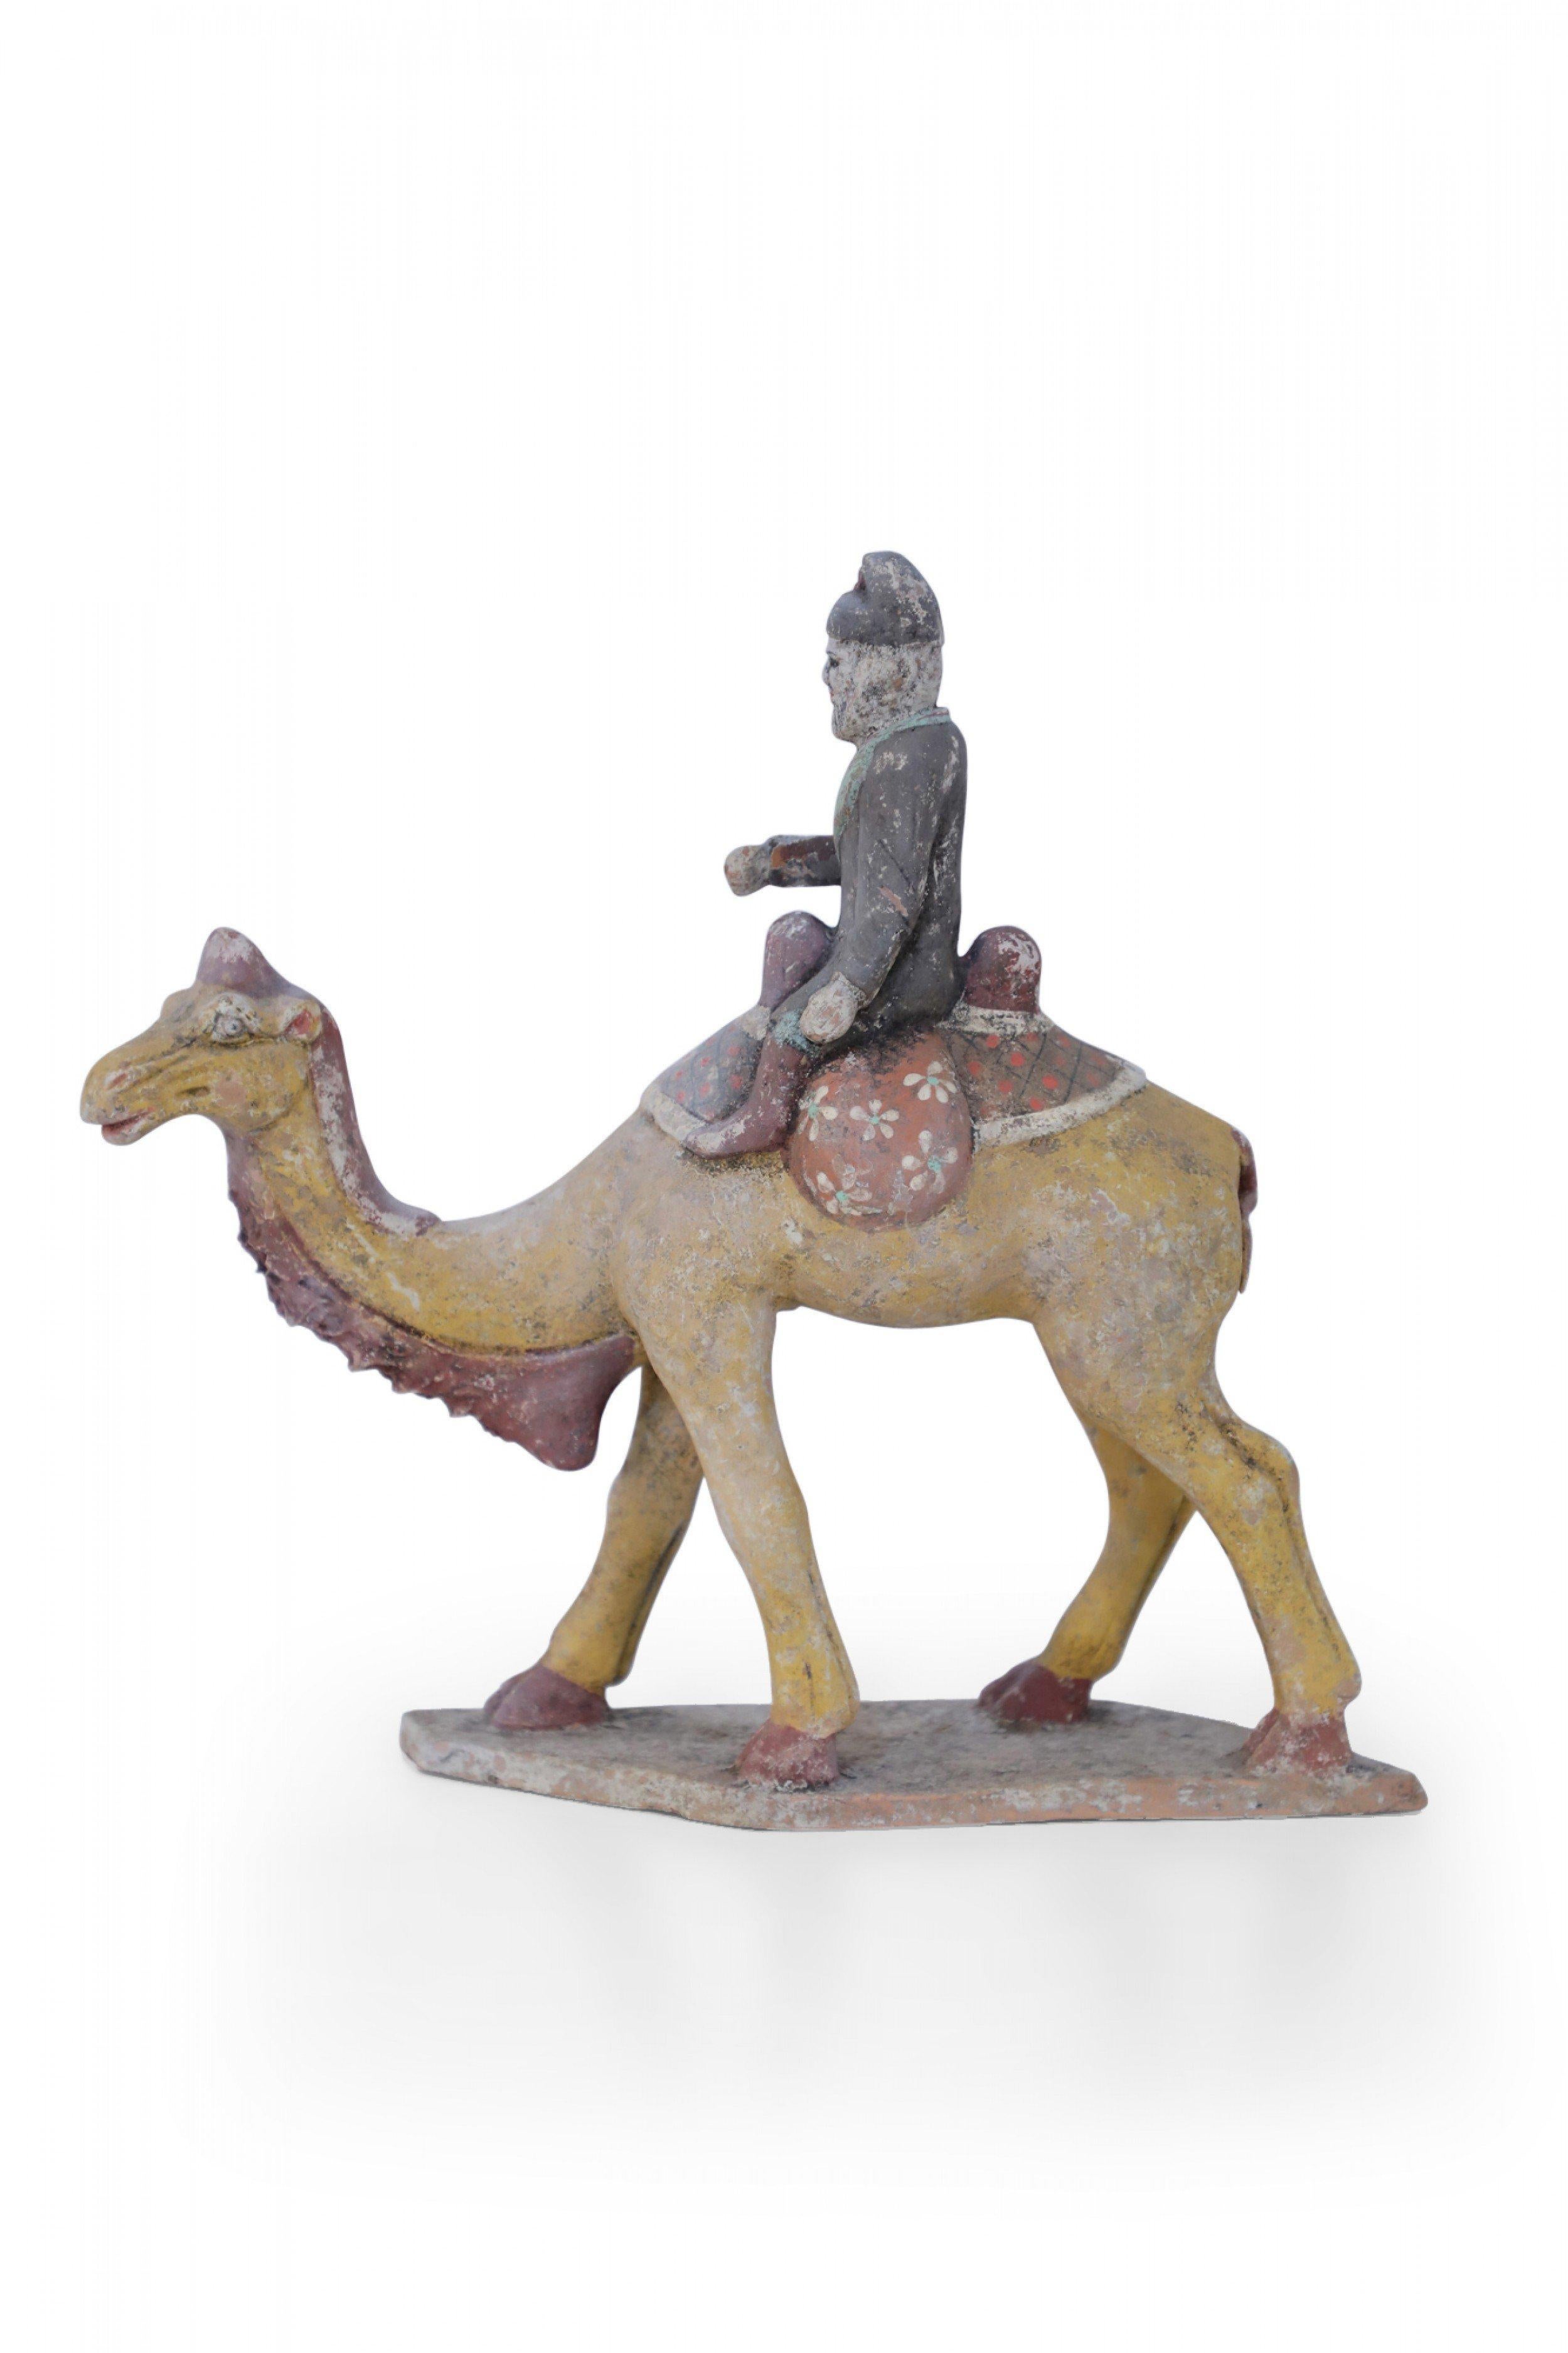 Antique Chinese Tang Dynasty-style terracotta tomb figure of a bearded rider dressed in a gray coat and brown boots riding a yellow Bactrian camel standing on a textured base.
 